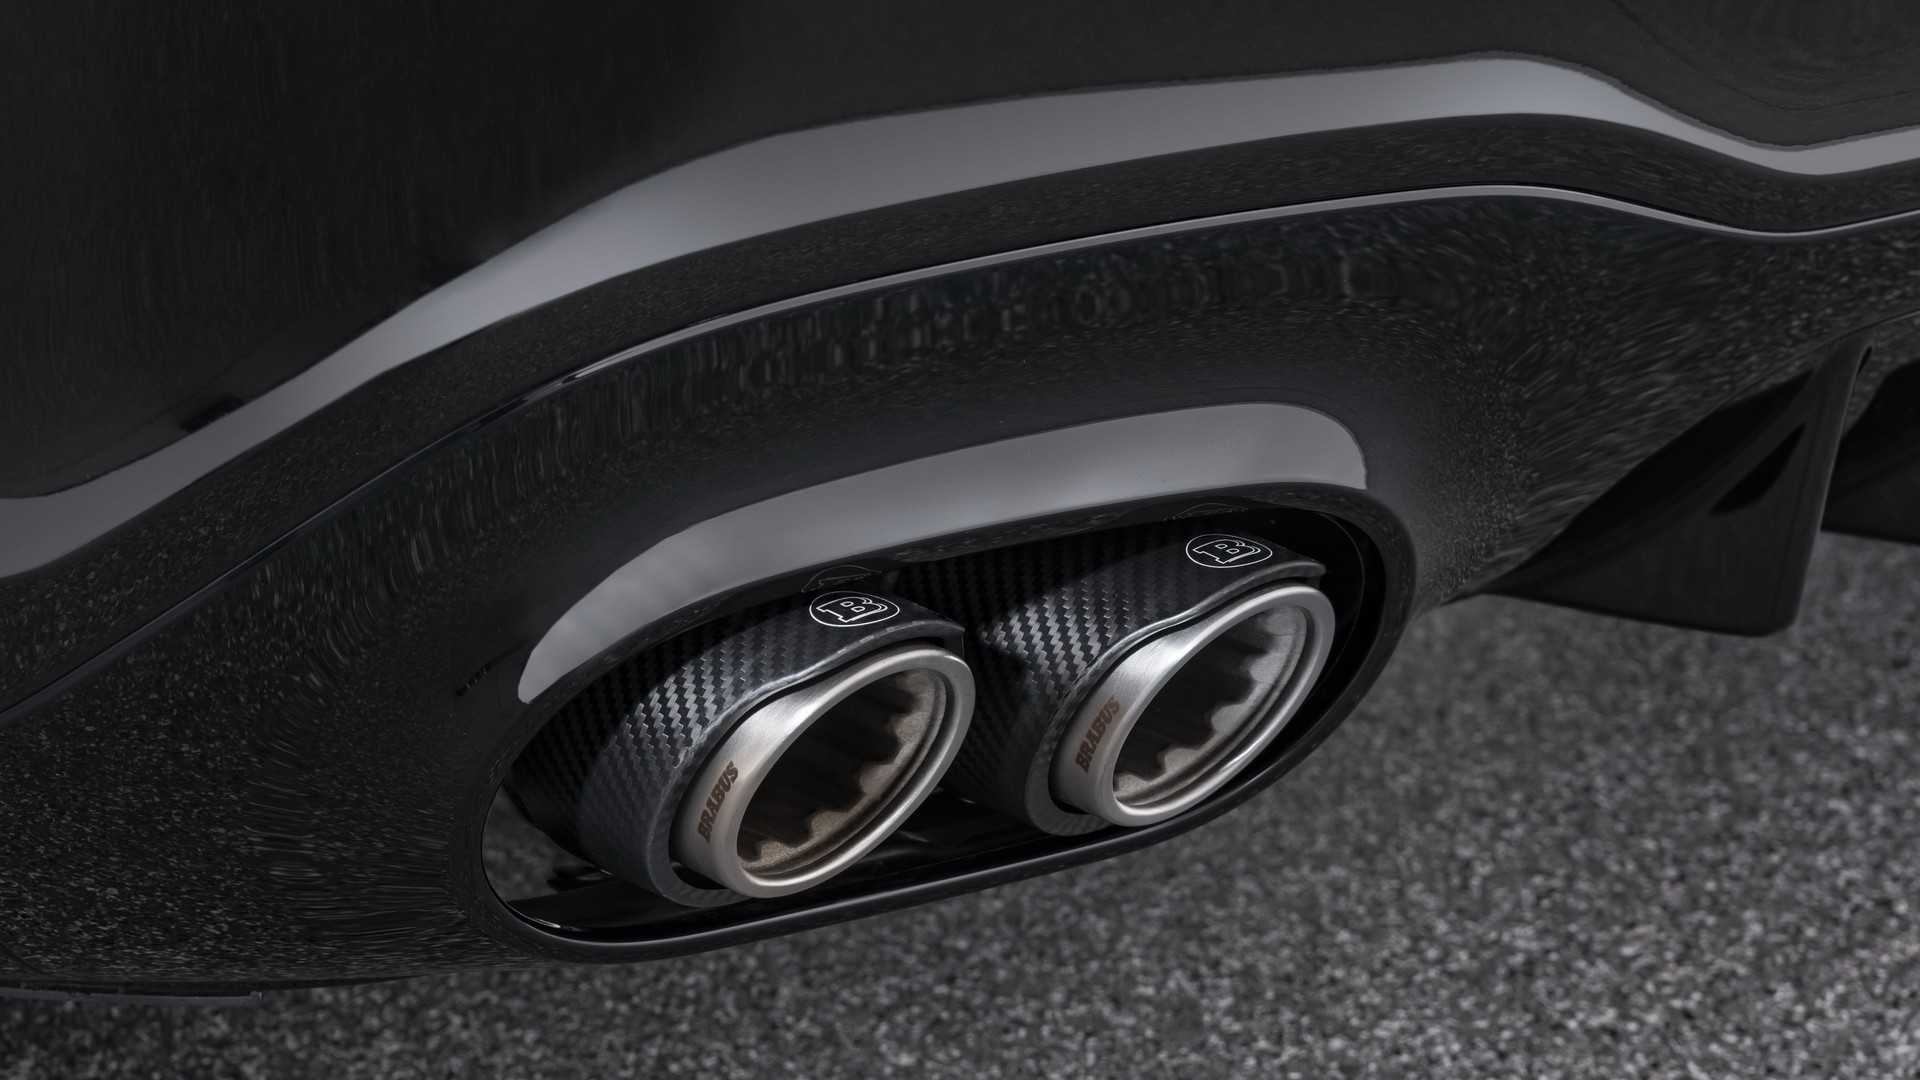 2019 BRABUS Mercedes-AMG A 35 Exhaust Wallpapers (10)